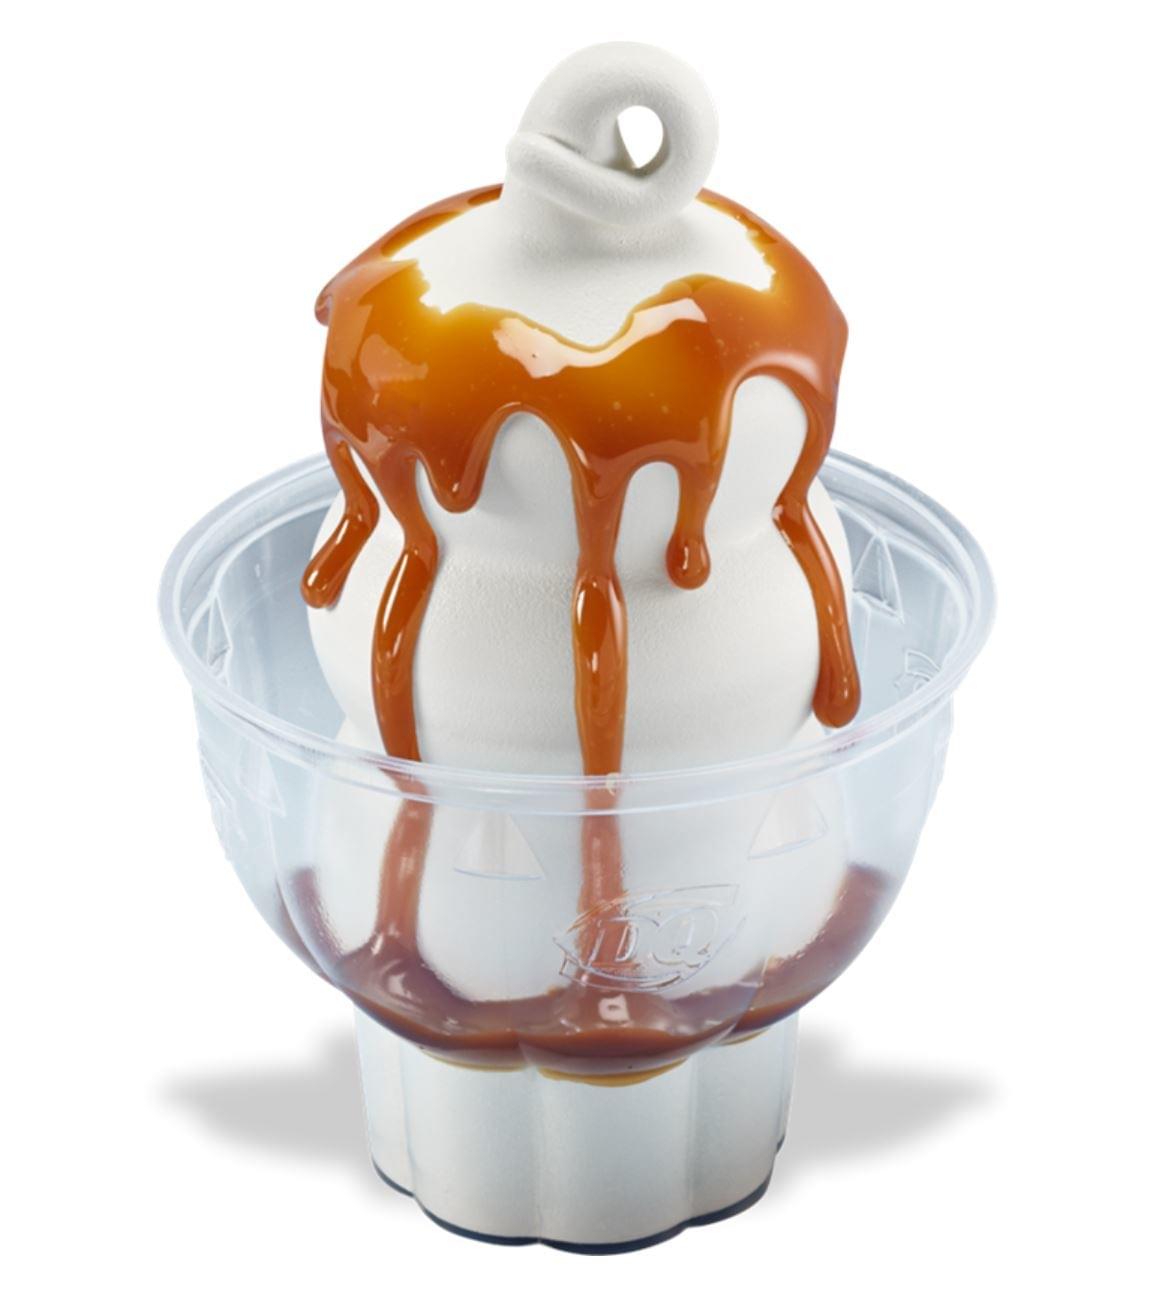 Dairy Queen Small Caramel Sundae Nutrition Facts